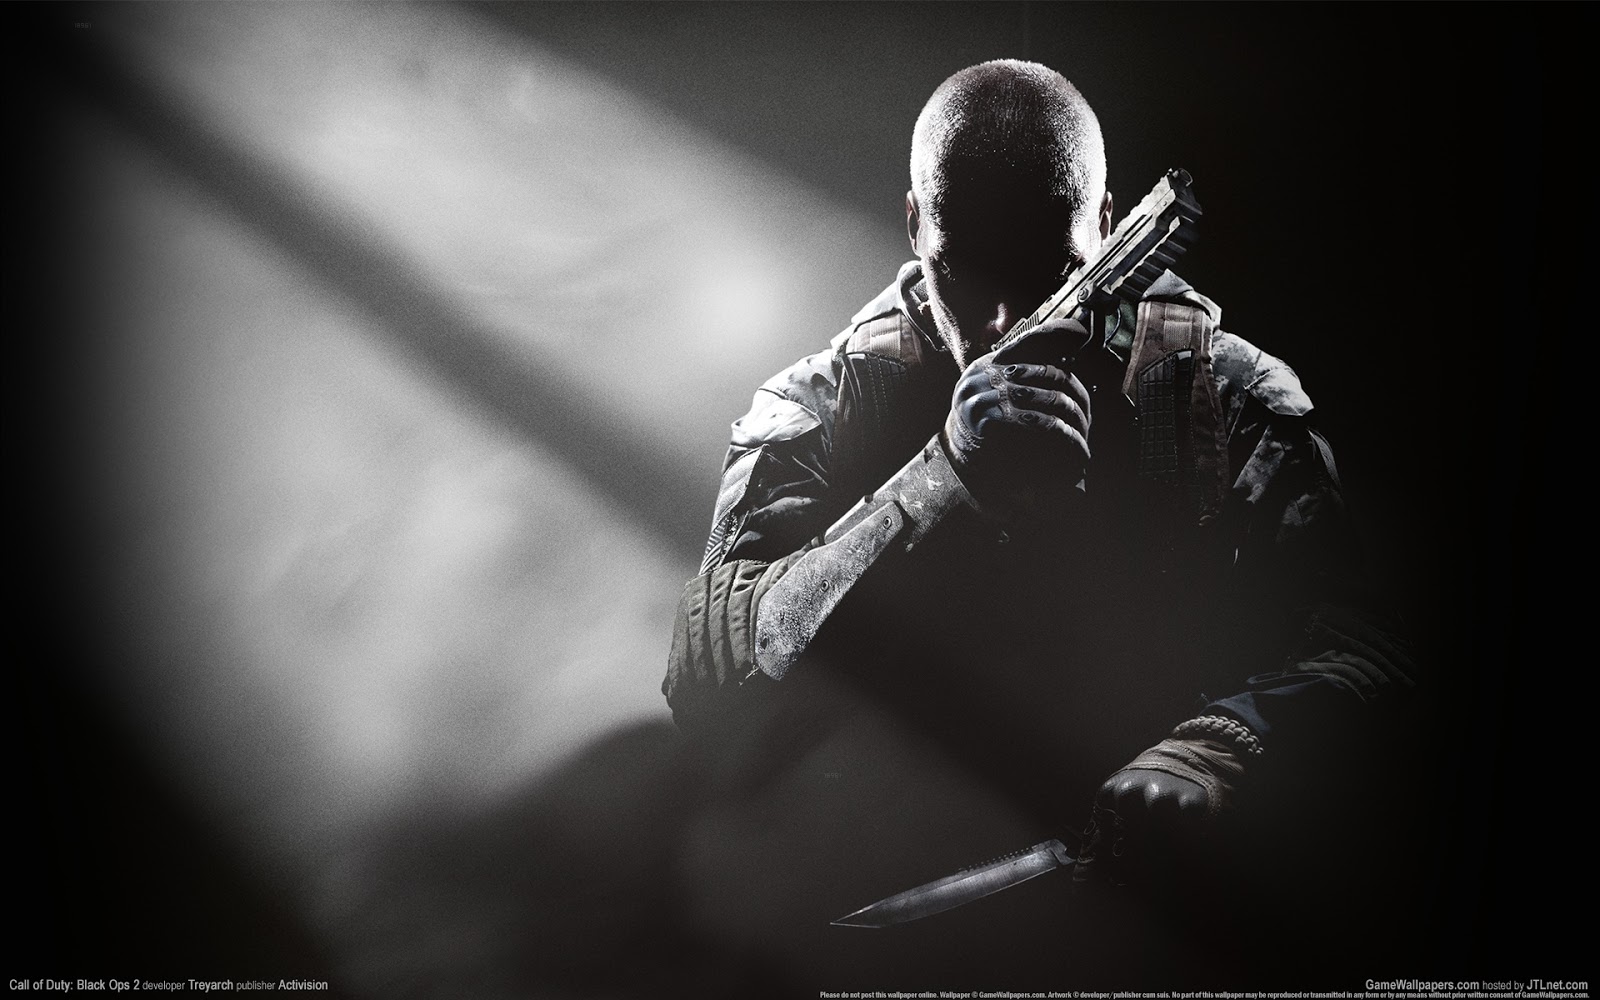 CALL OF DUTY HD  WALLPAPERS  1920x1080 Hd  Wallpapery